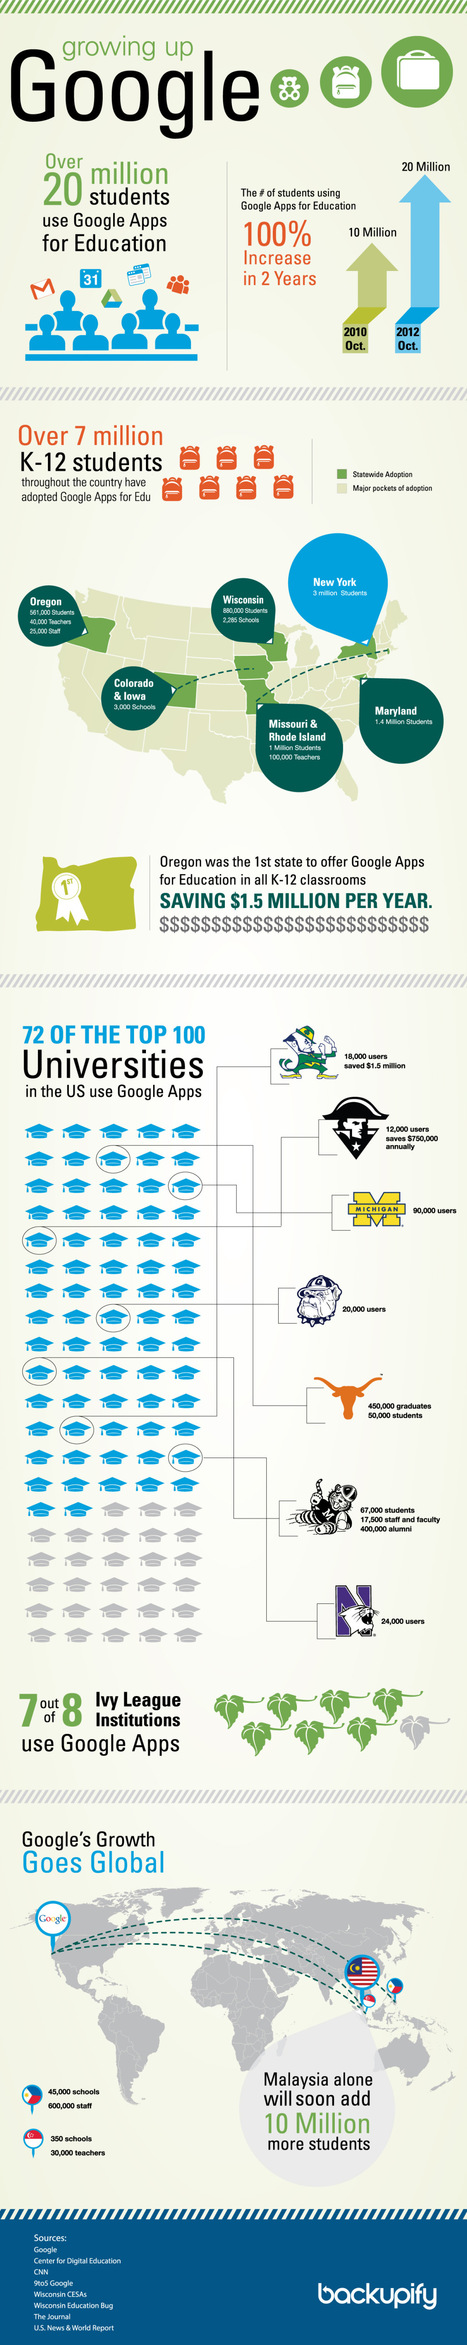 Schooled by Google: How Google Apps is penetrating education [infographic] | 21st Century Learning and Teaching | Scoop.it